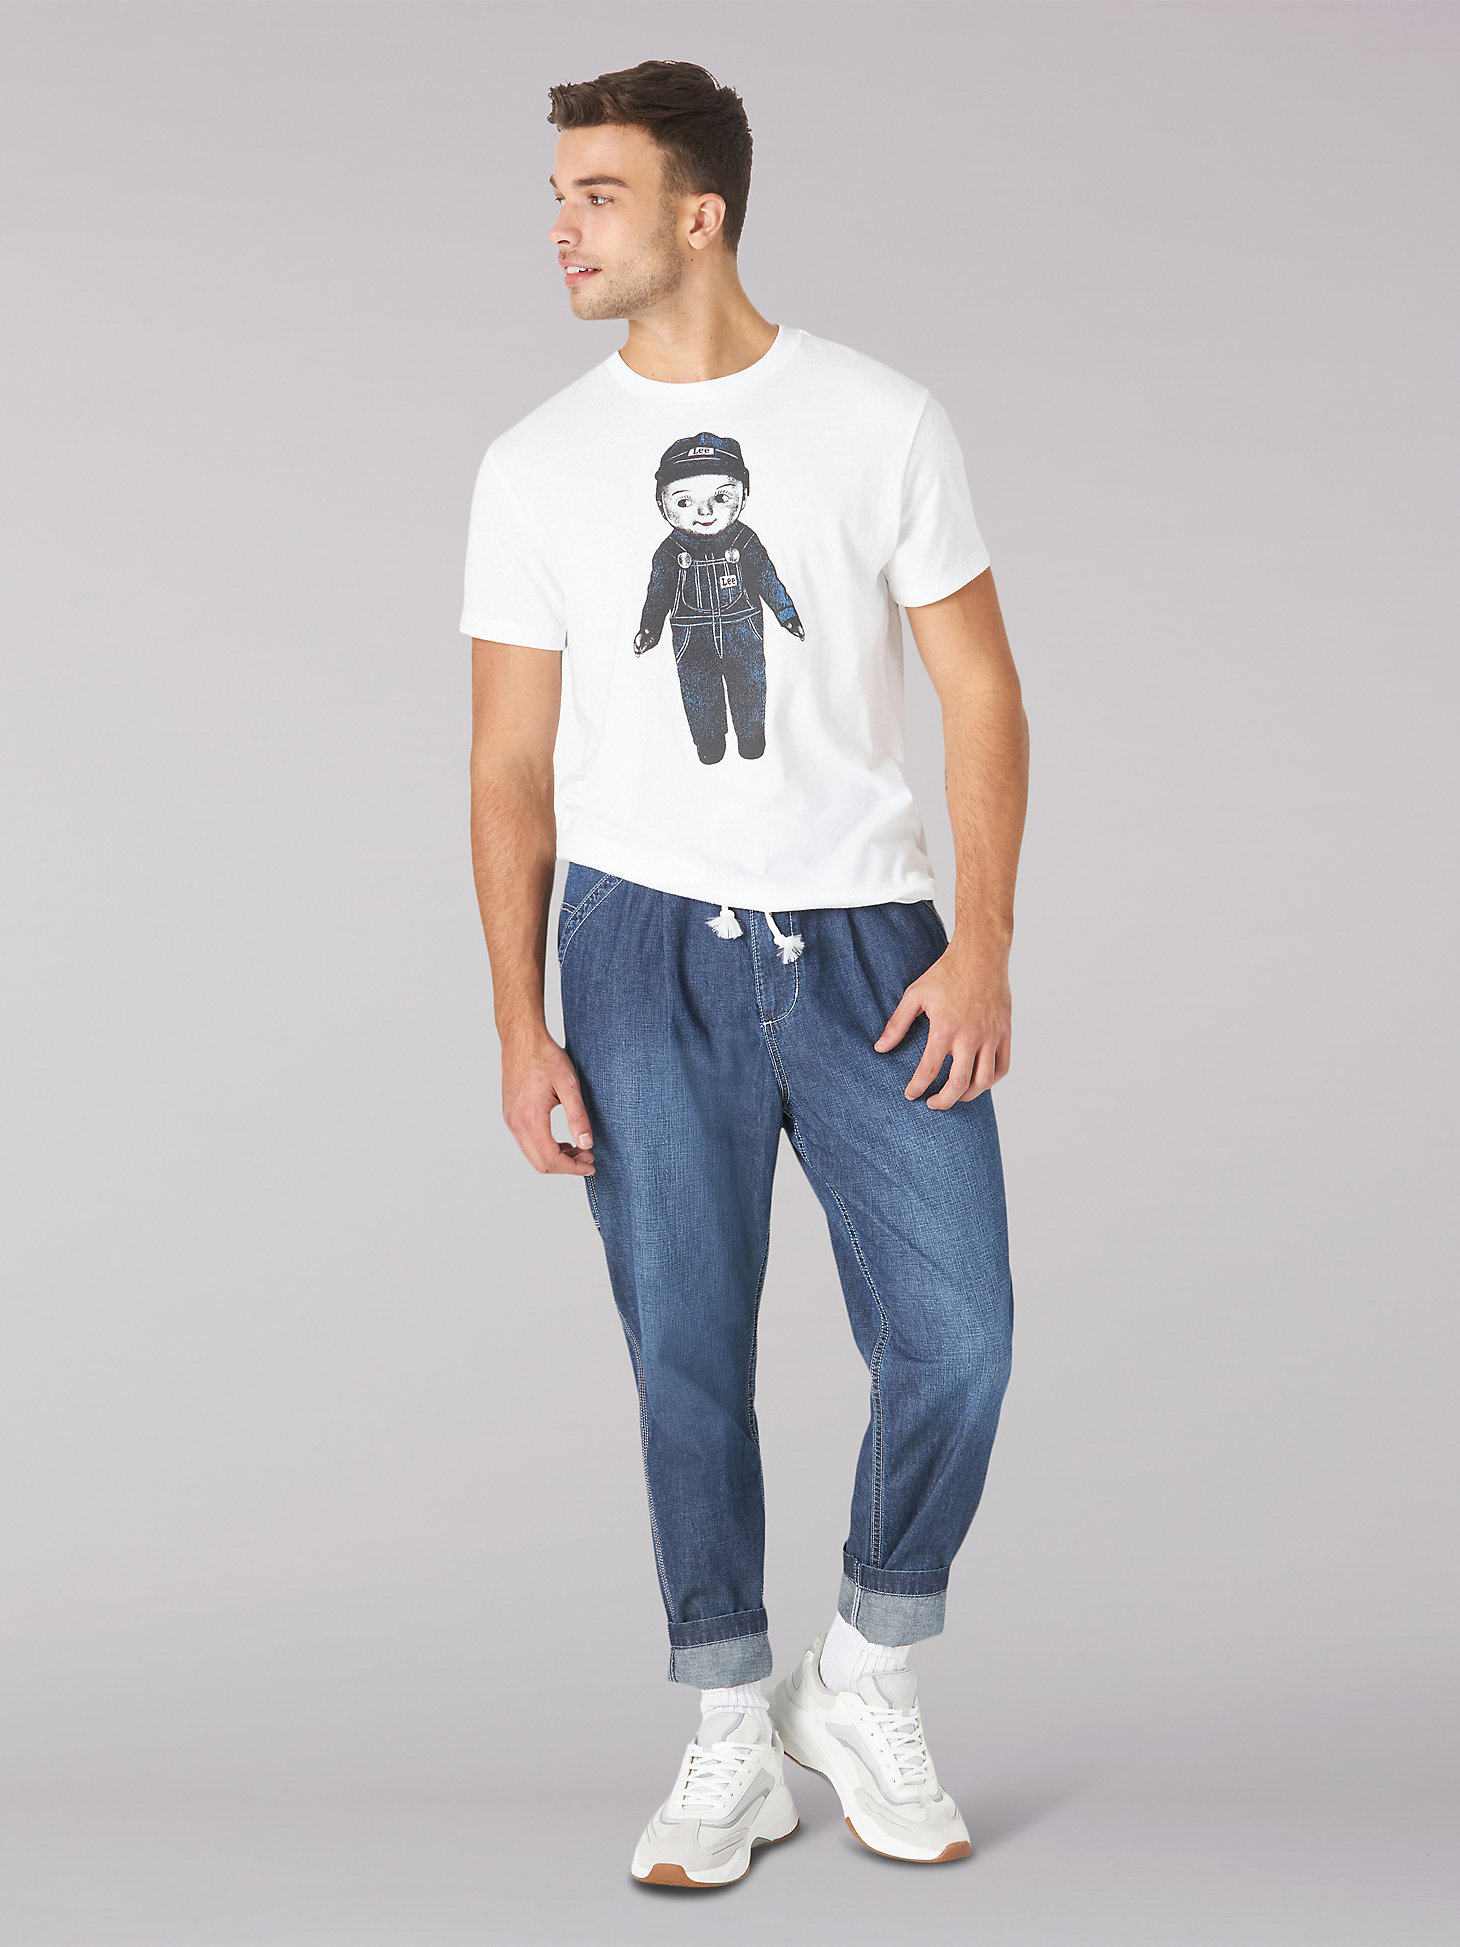 Men's Heritage Buddy Lee in Overalls Graphic Tee in White alternative view 3